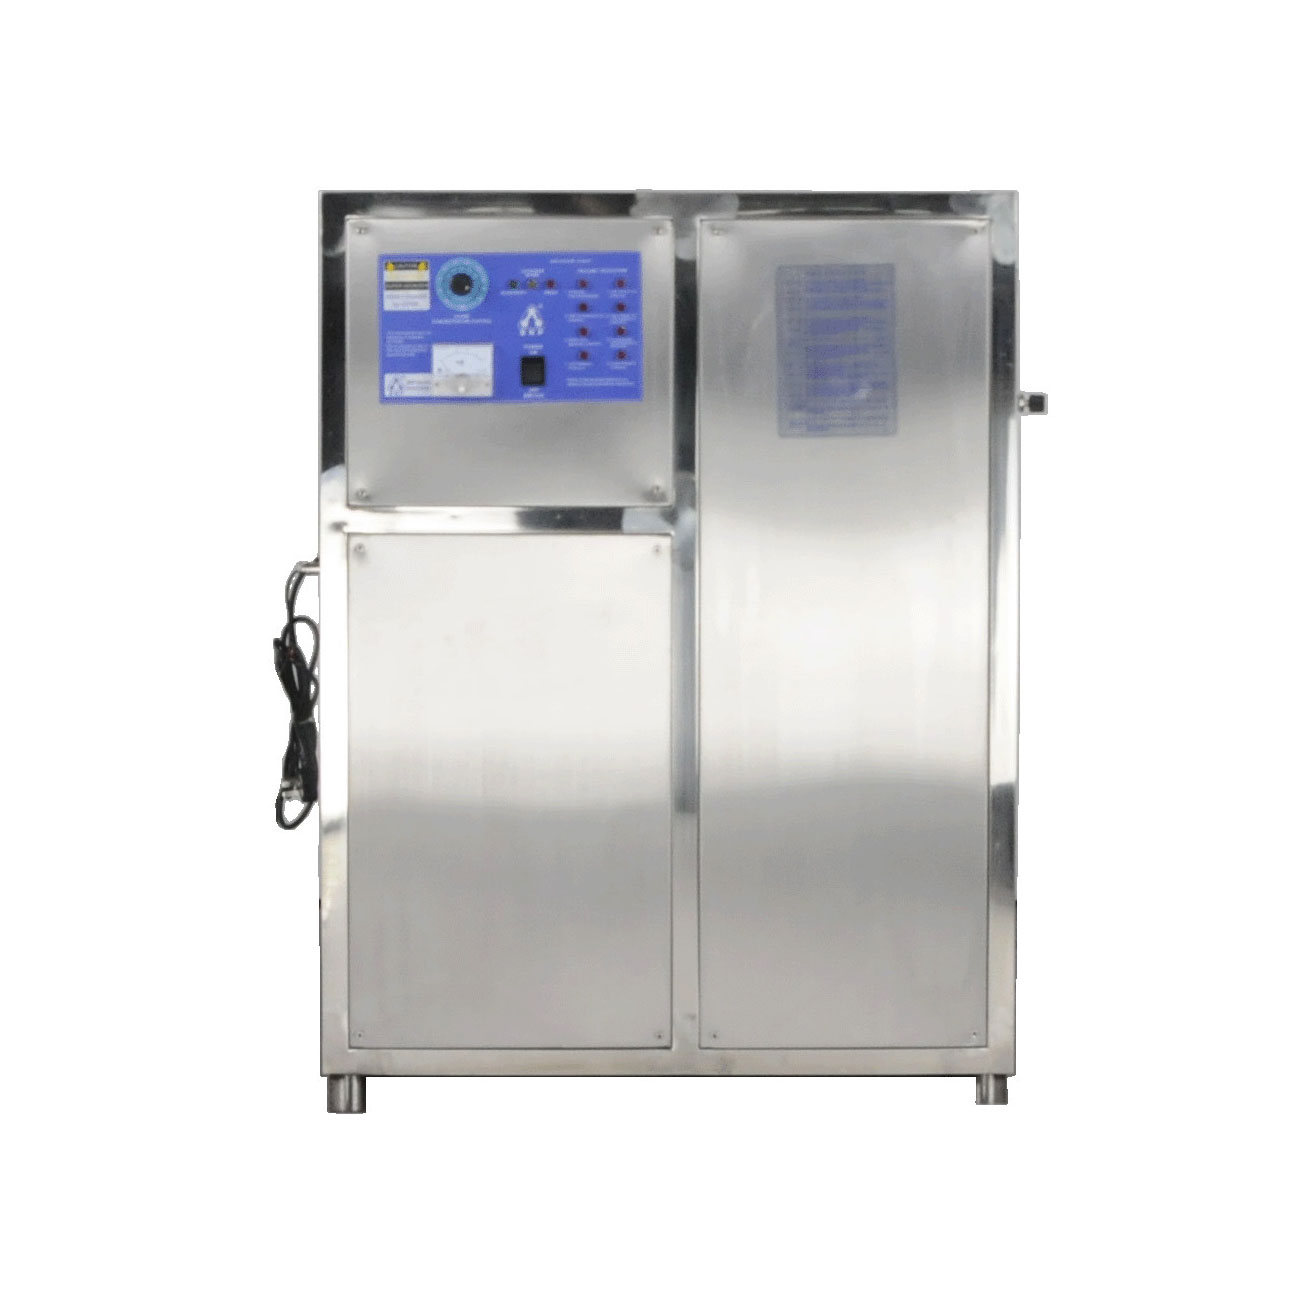 Factory Supply Well Water Ozone Generator - Reliable Supplier China BNP SOZ-YW-200G Industrial Oxygen-Enriched Ozone Generator for Public Place Air Purifier and O3 Sterilizer Water Disinfection &#...